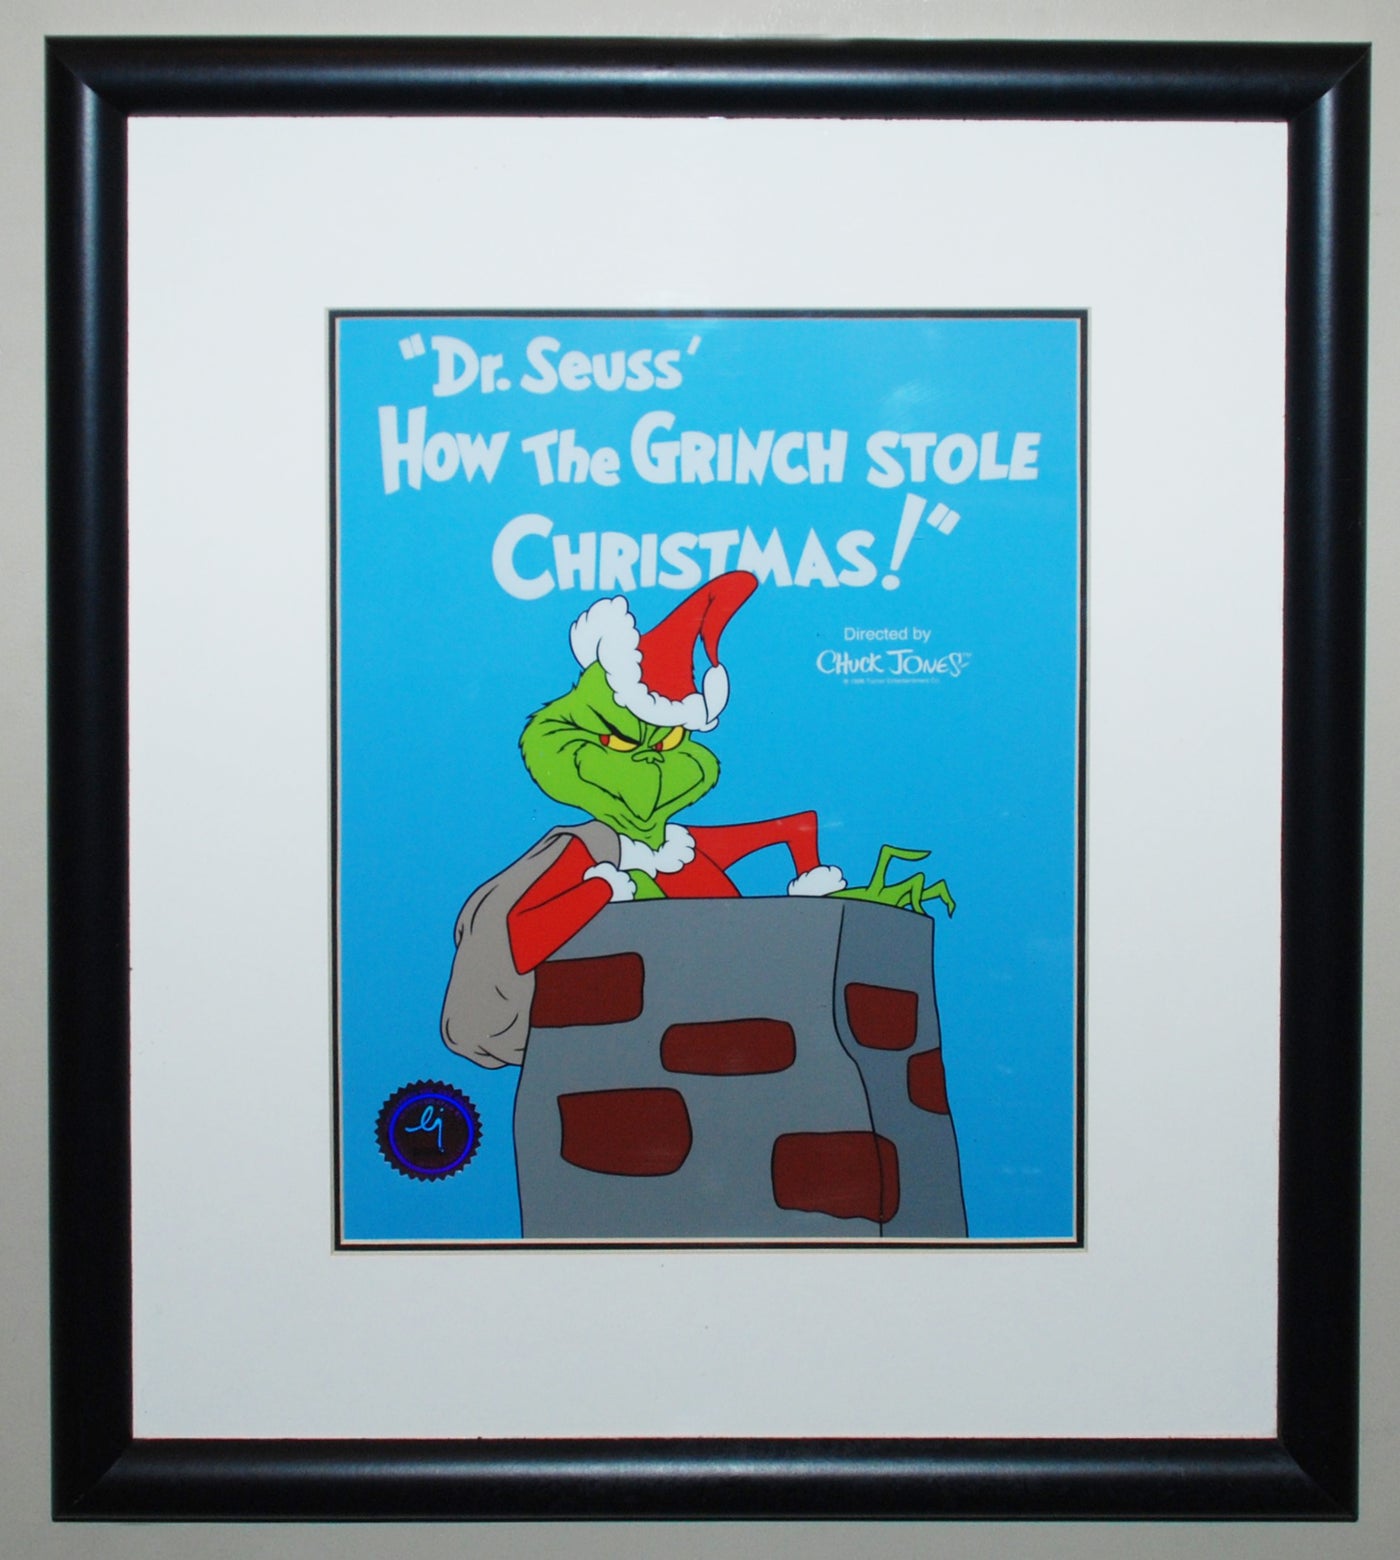 Original Chuck Jones Limited Edition Serigraph Cel from How the Grinch Stole Christmas